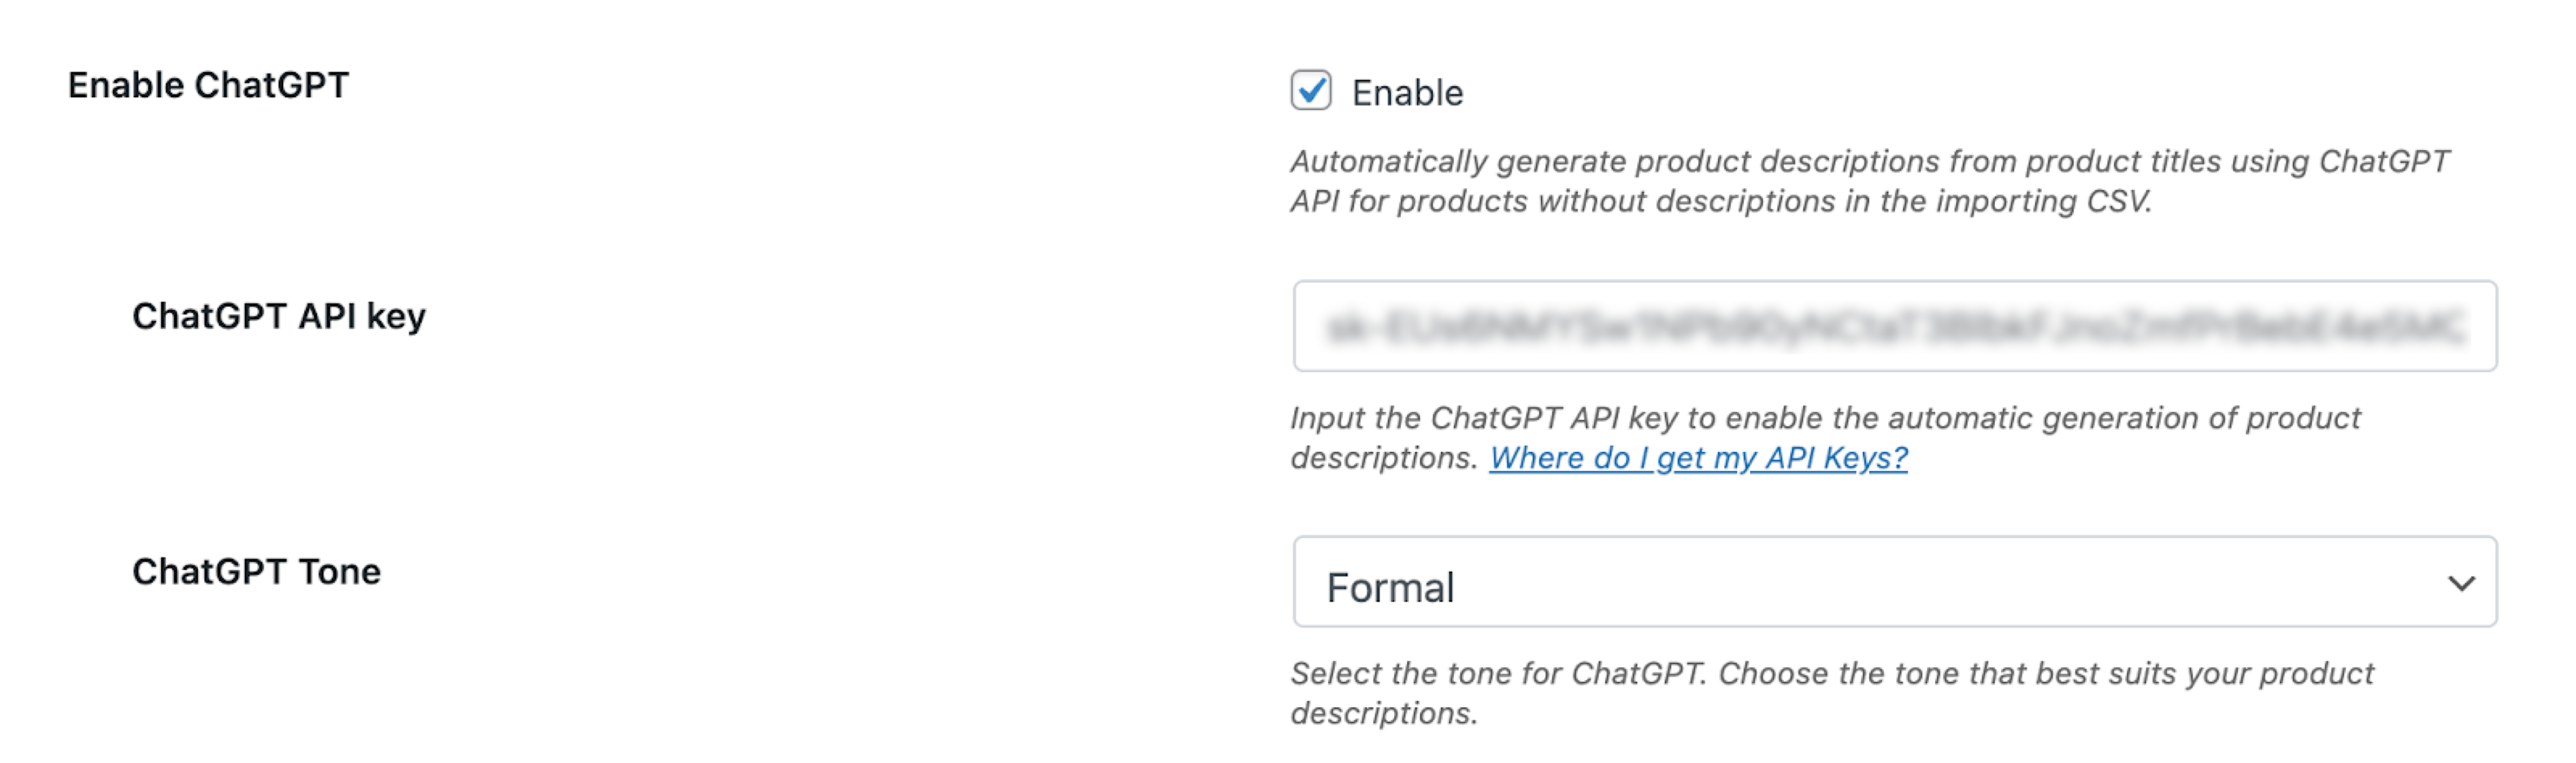 Setting to add ChatGPT credentials to create product descriptions while importing for products without descriptions.